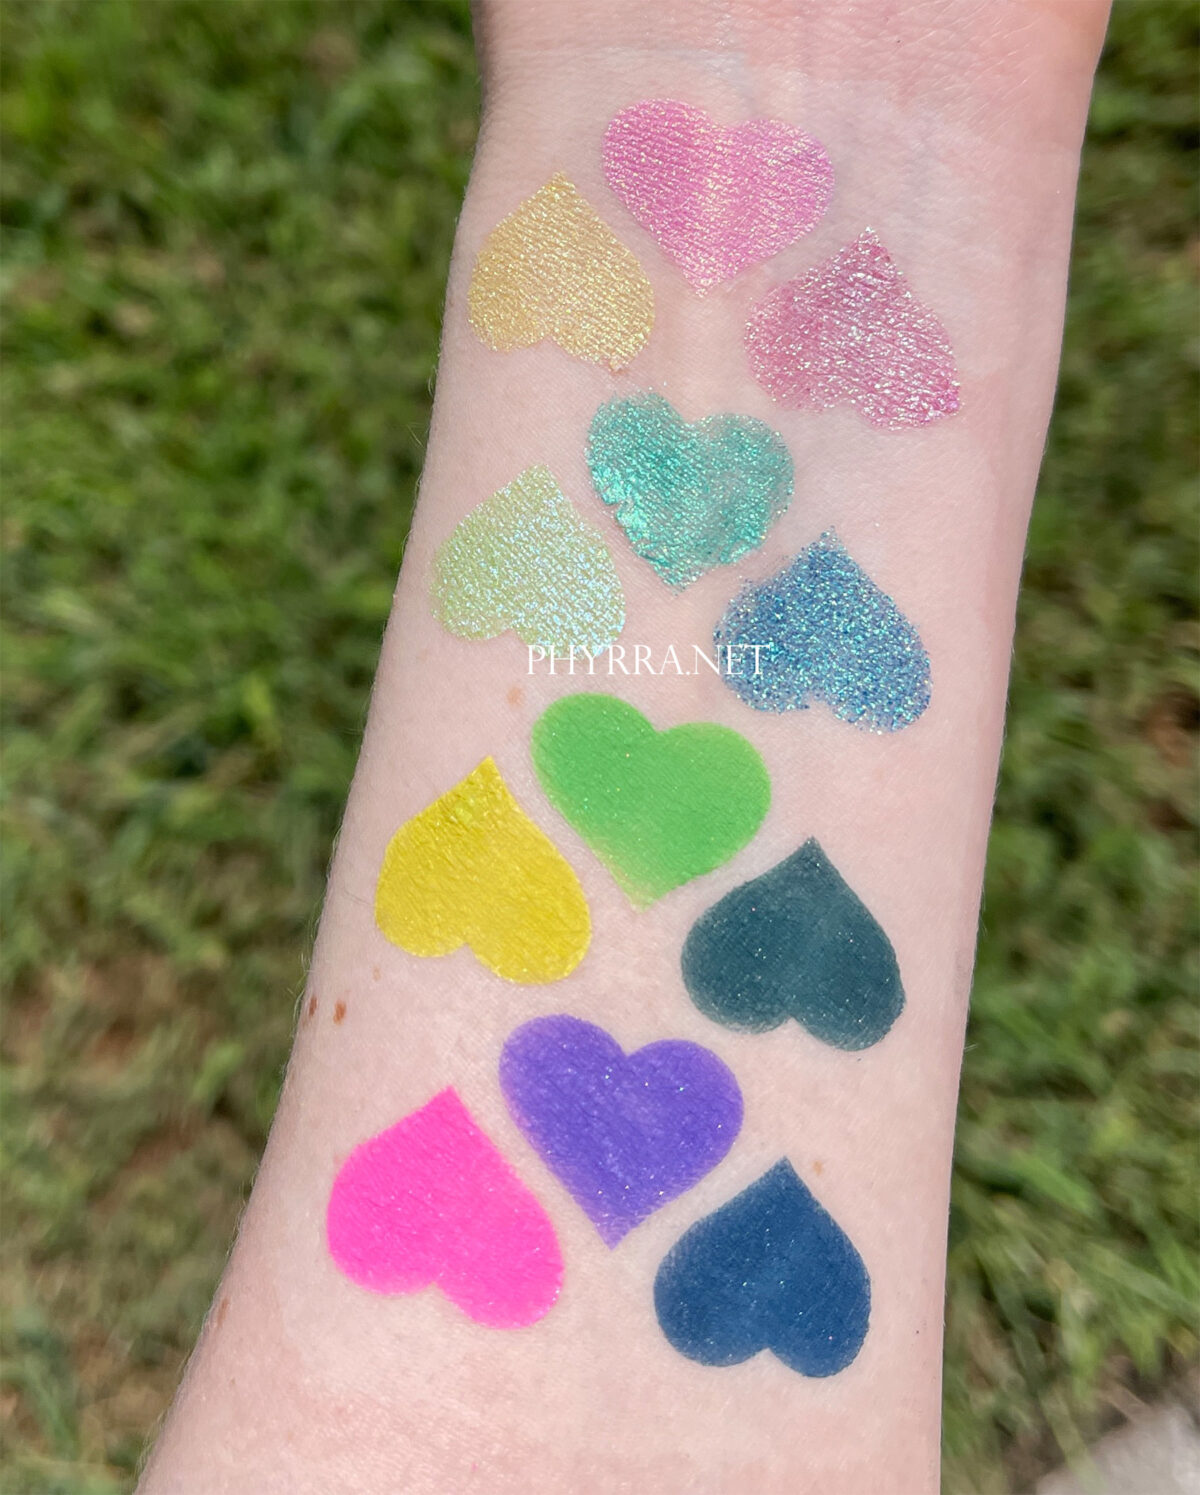 Light skin swatches of the Lethal Cosmetics 1UP palette in direct sunlight